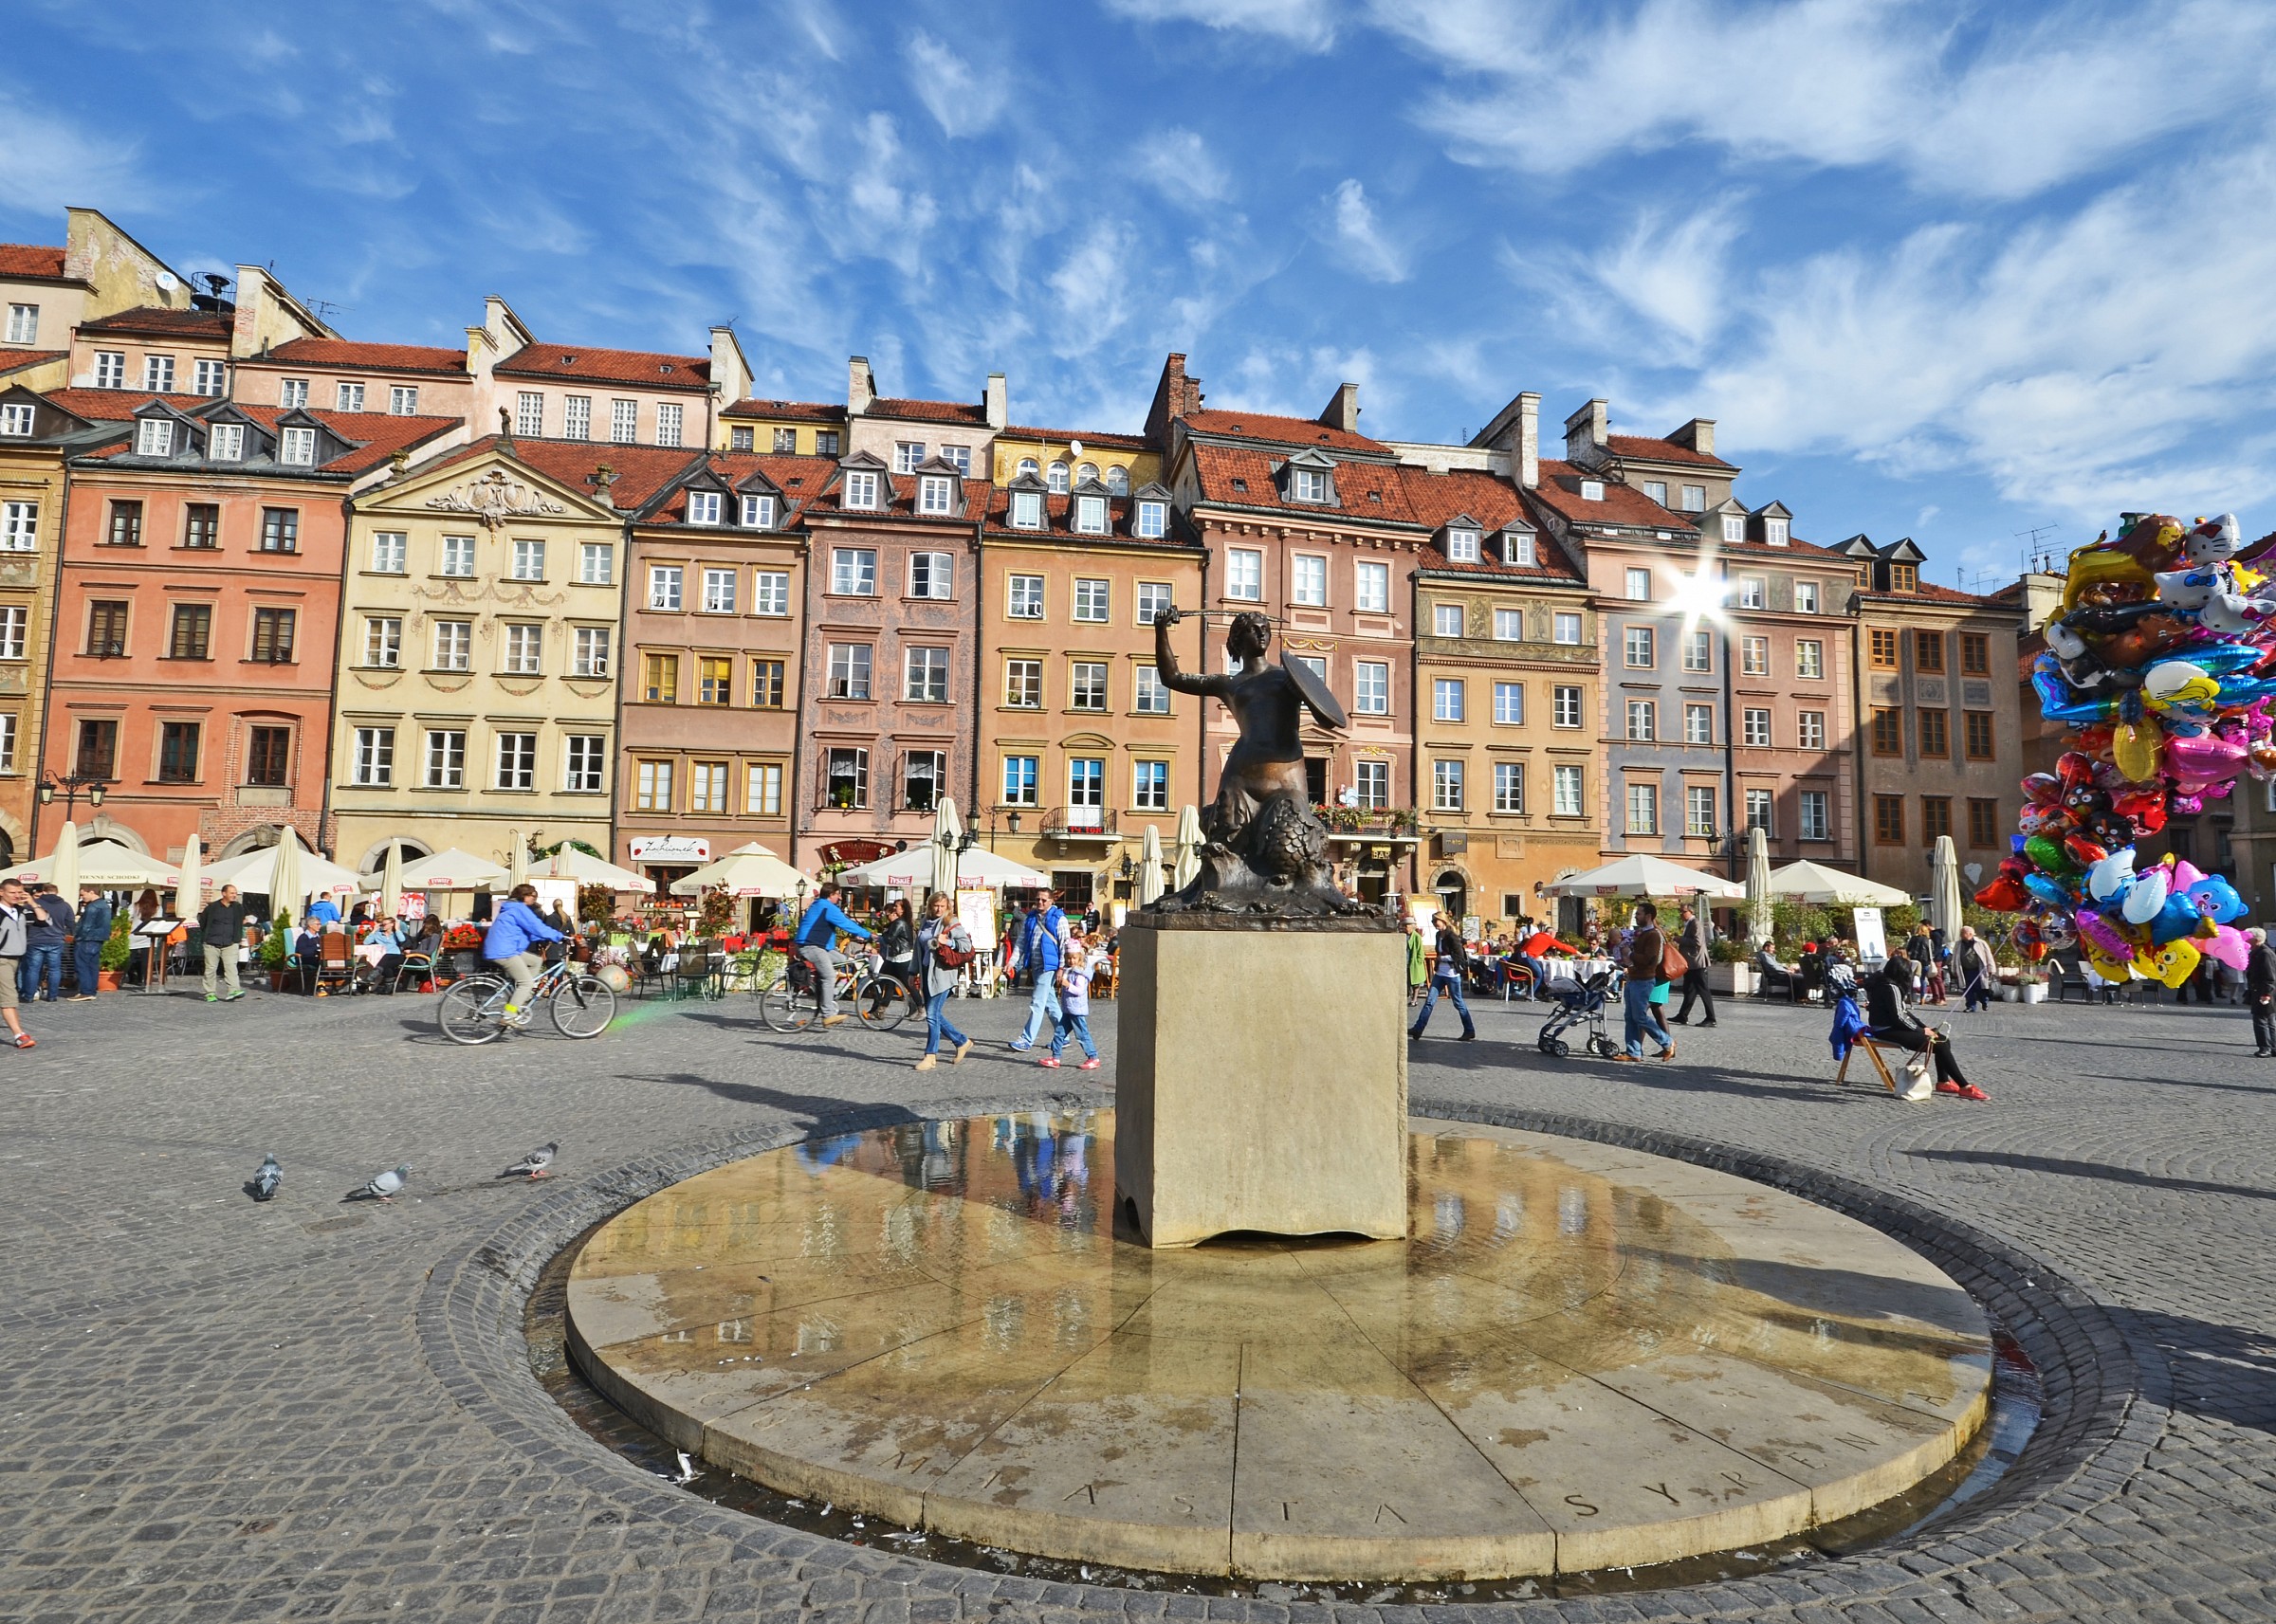 Warsaw - Market Square, Old Town...